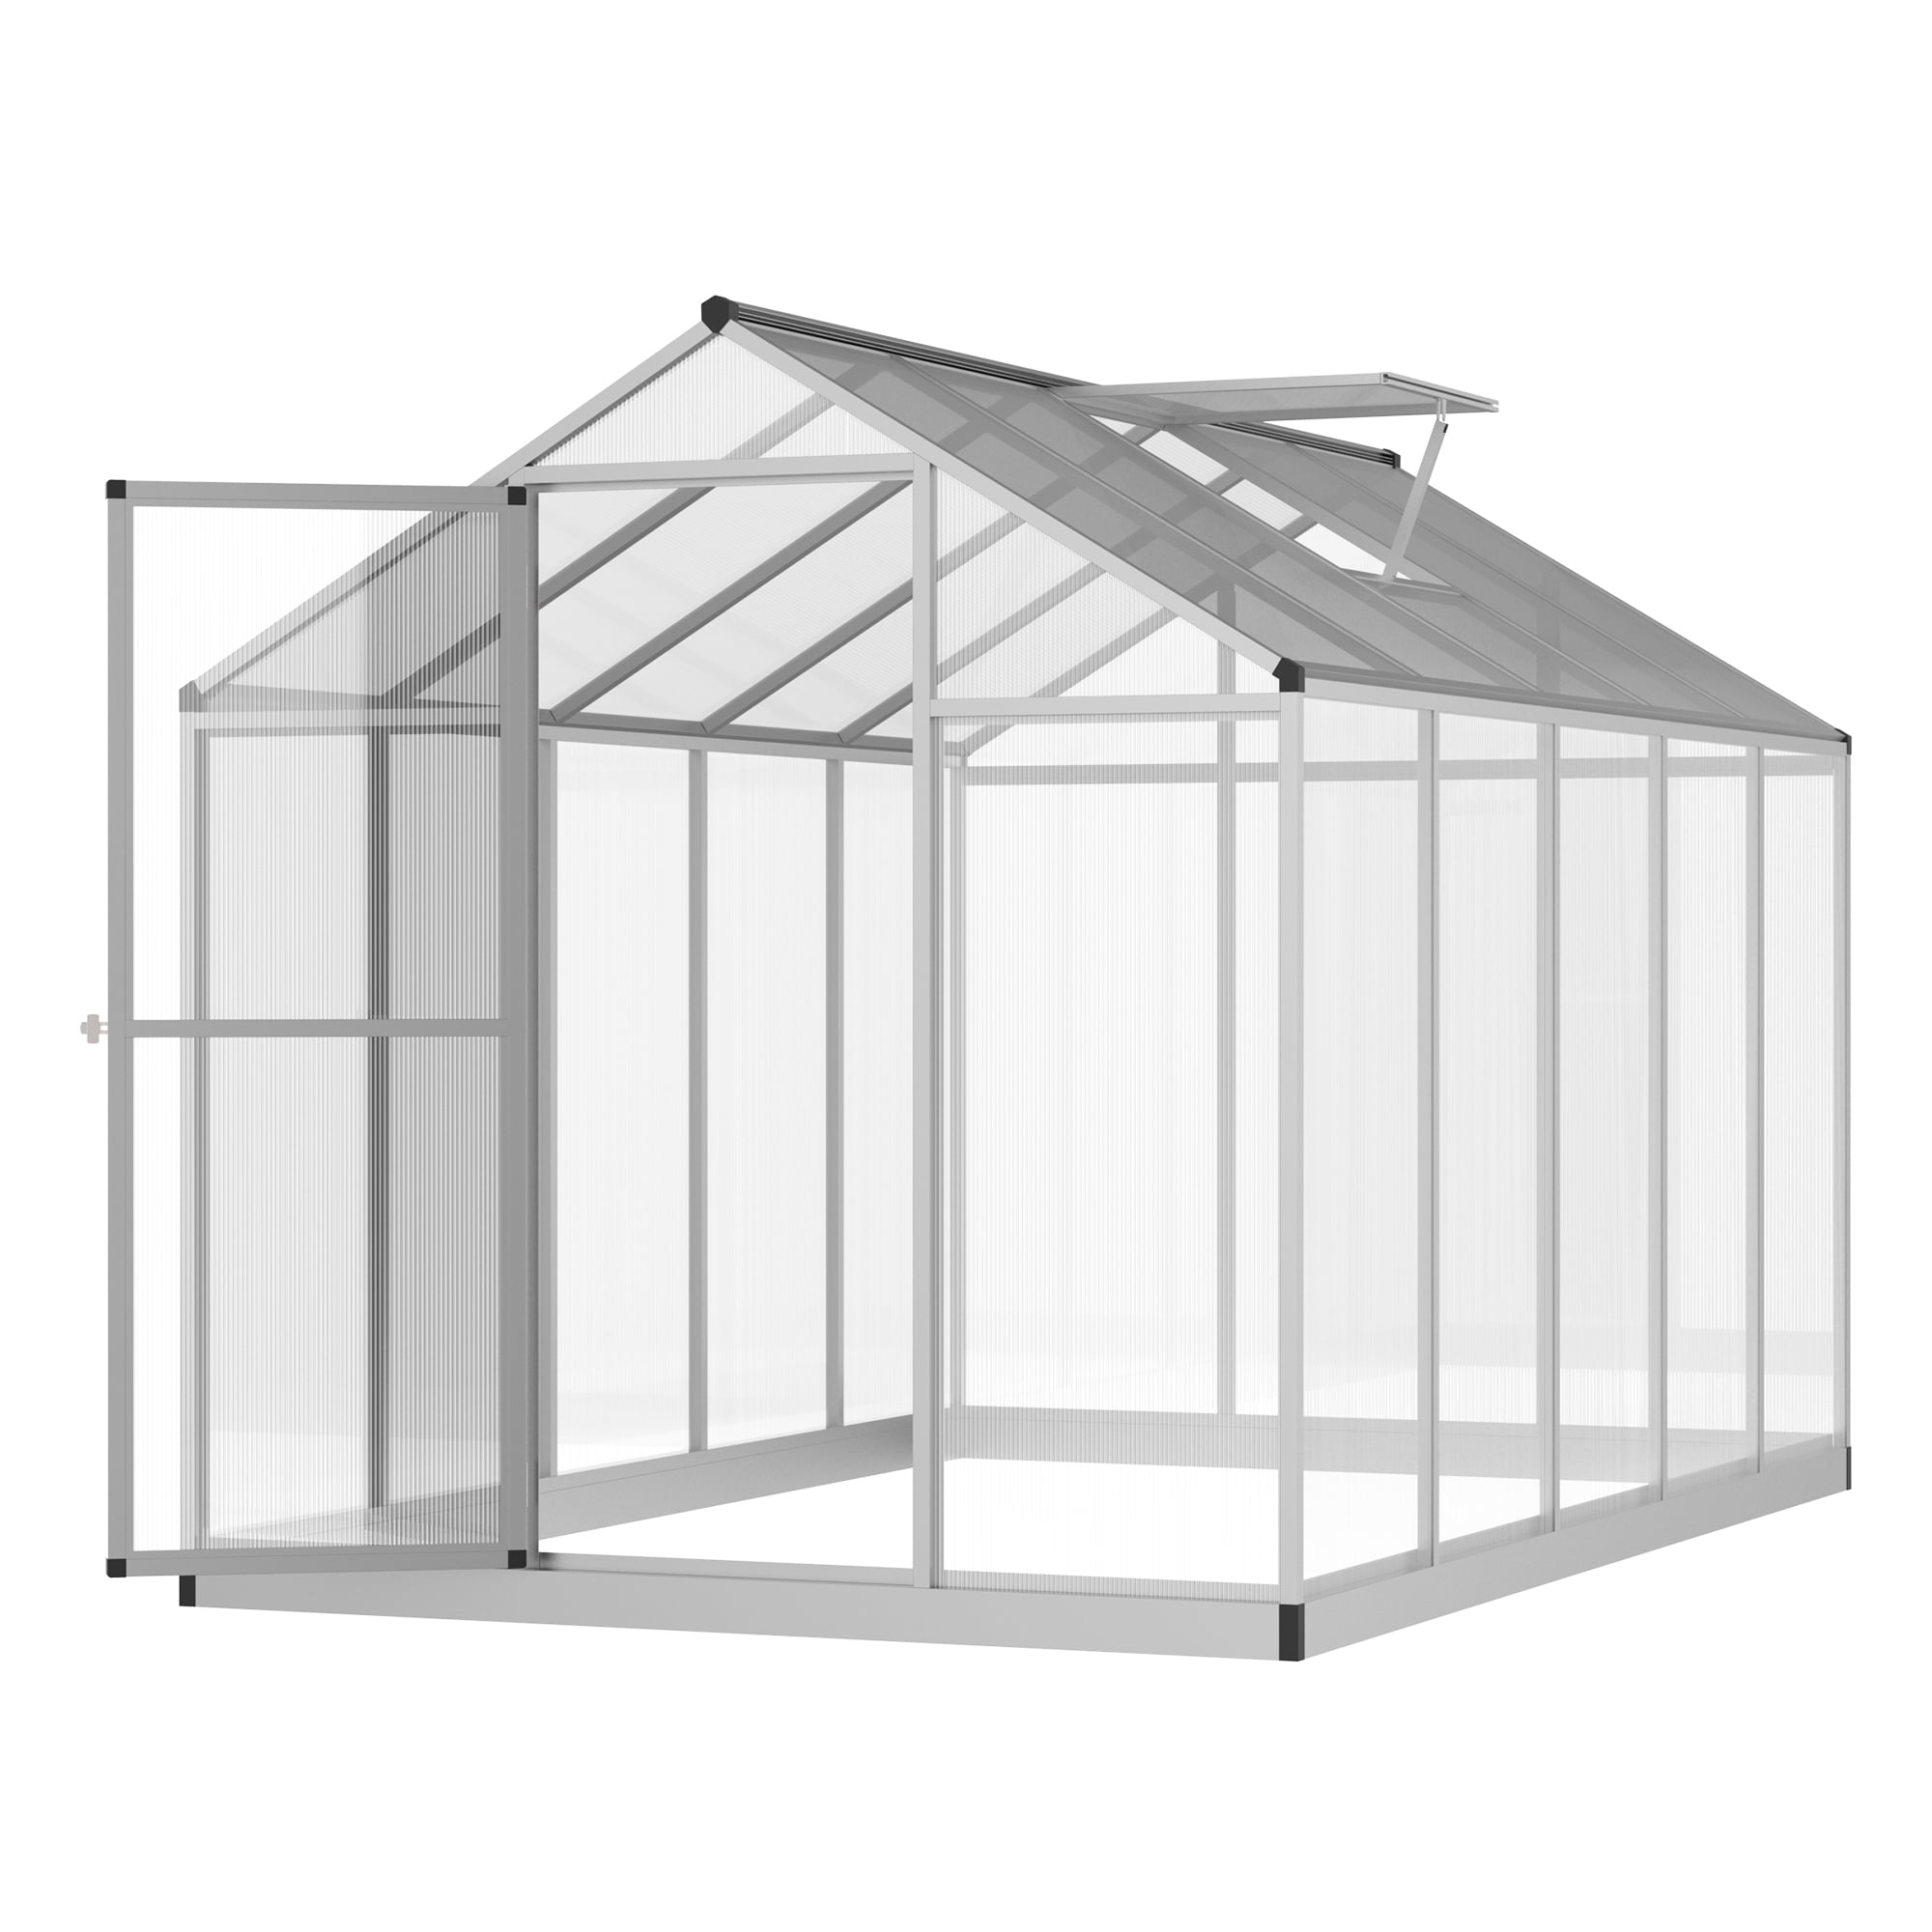 WALK IN GREENHOUSE COMPLETE 4 SHELVES CLEAR ROLL UP PLASTIC COVER 196x147x74cm 